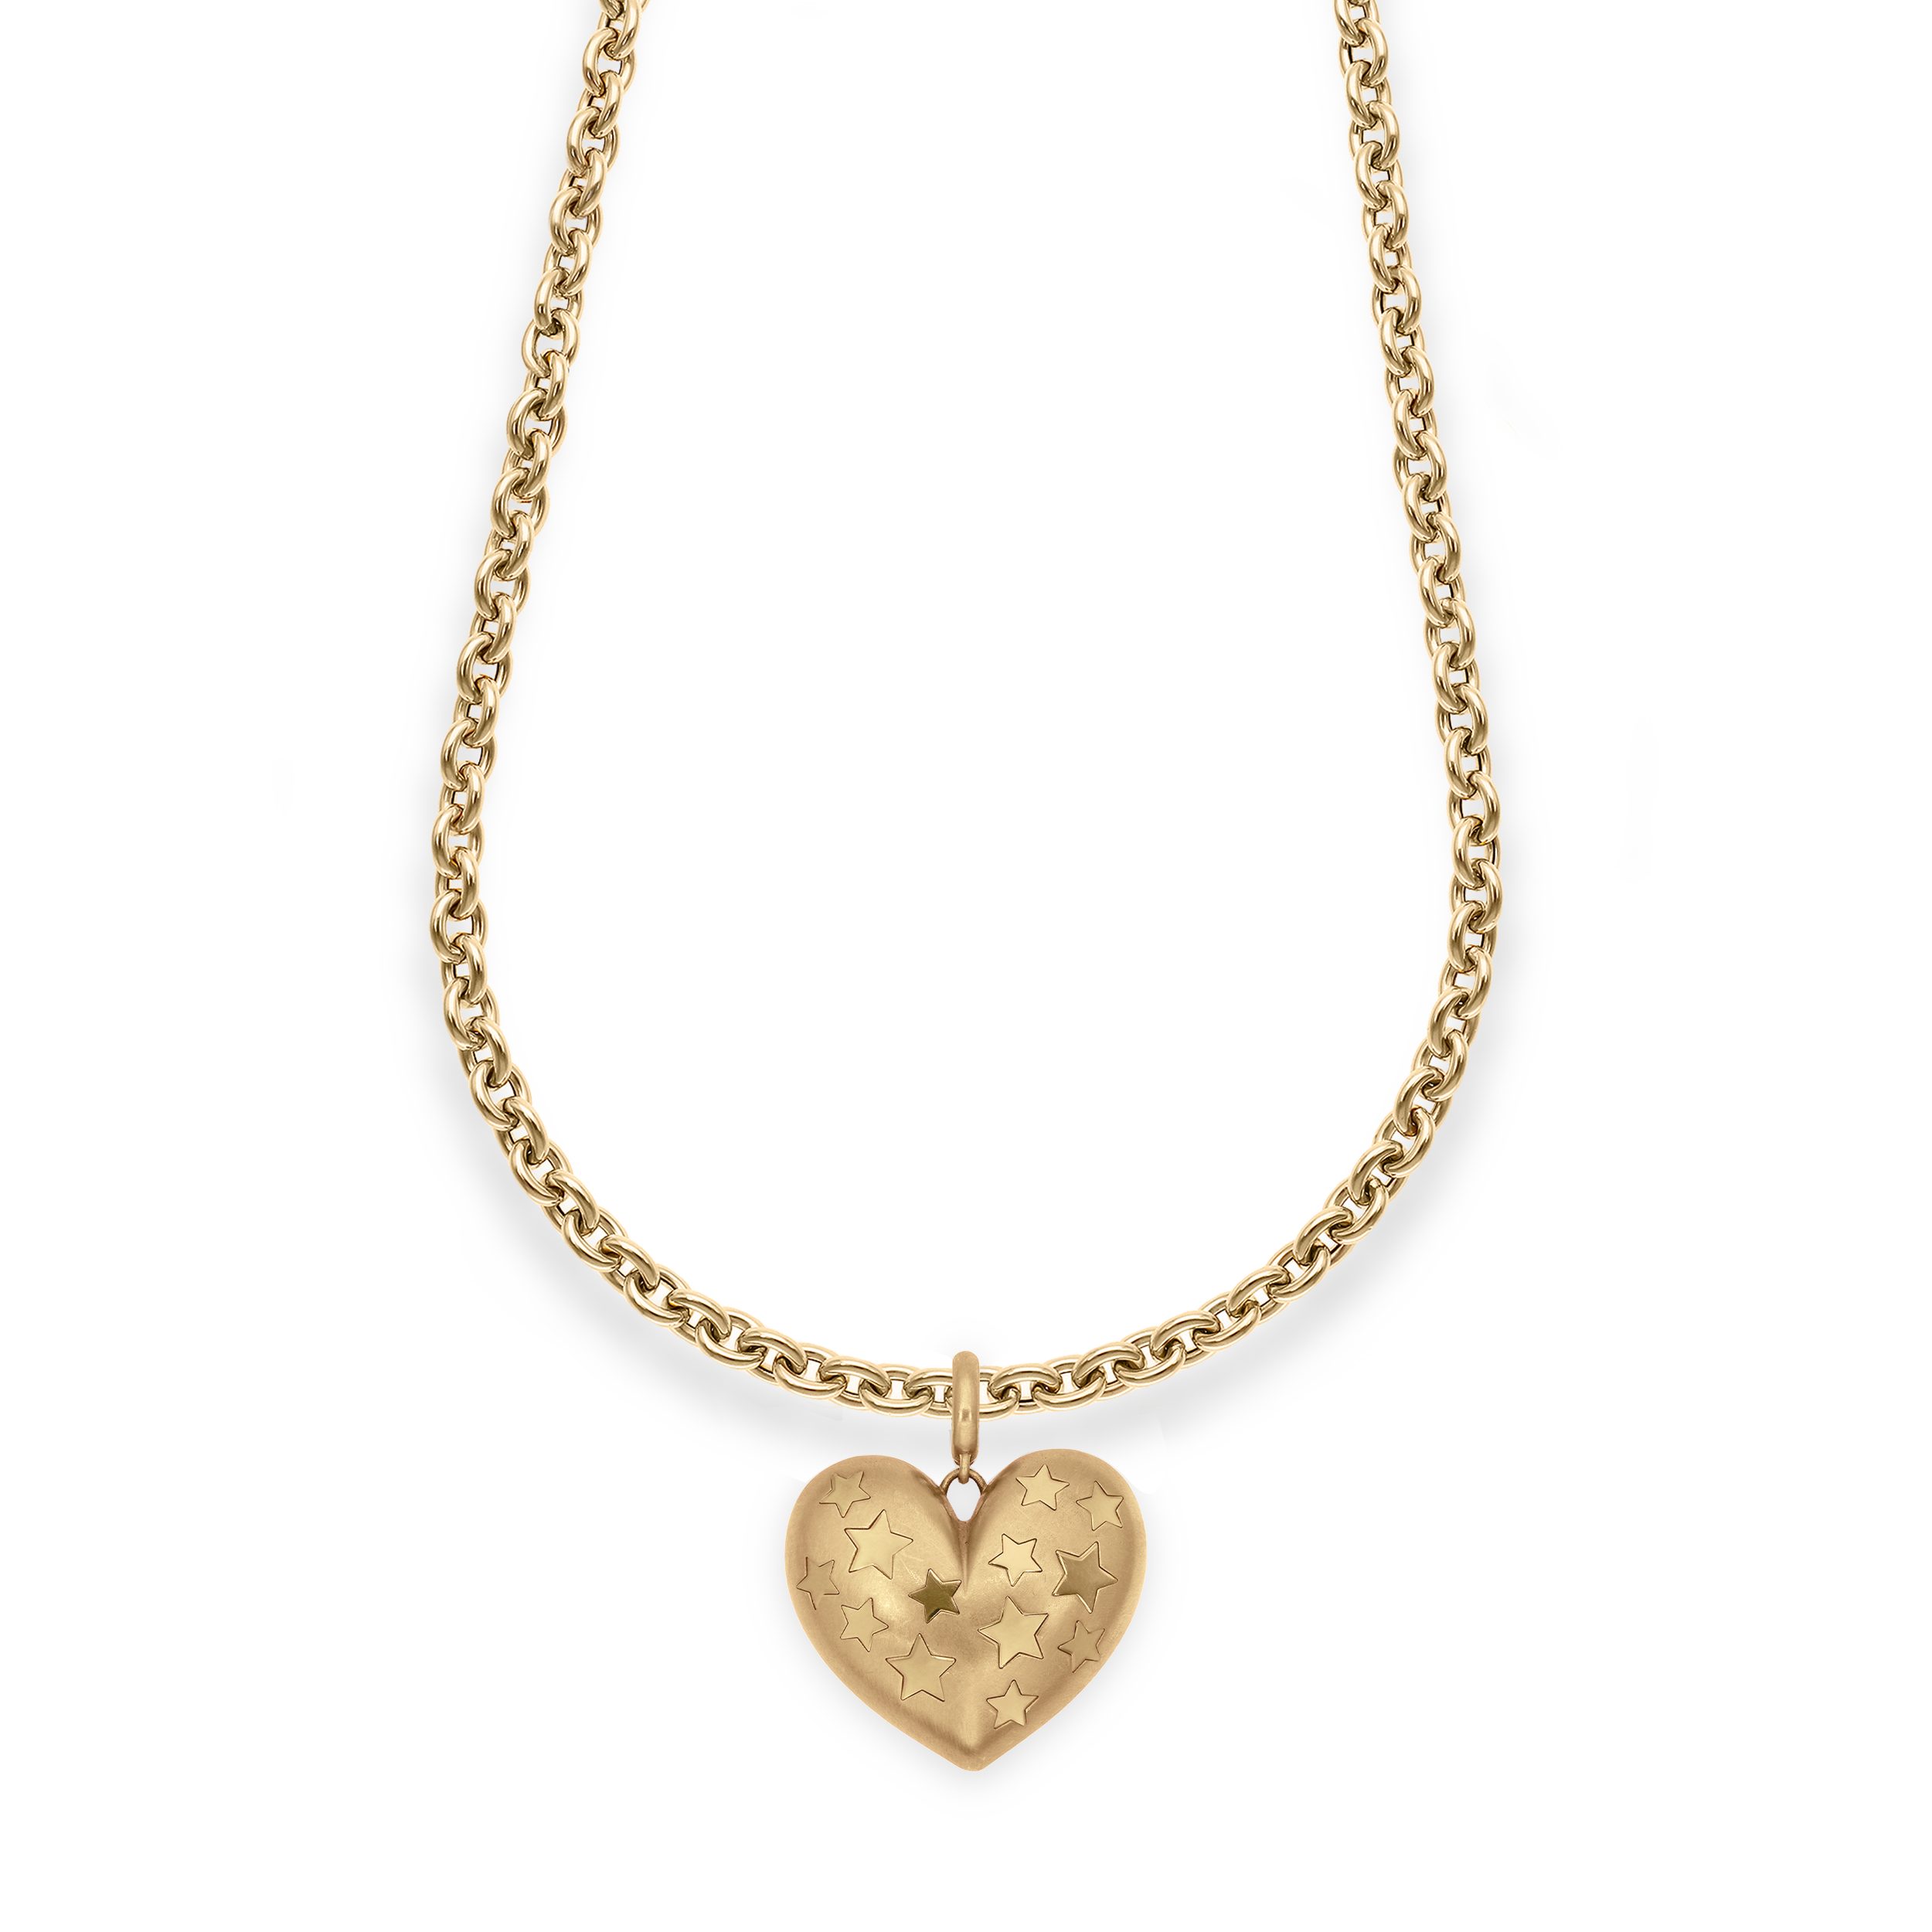 Paulette Brushed Yellow Gold Heart With Yellow Gold Stars Pendant on Long Chain 